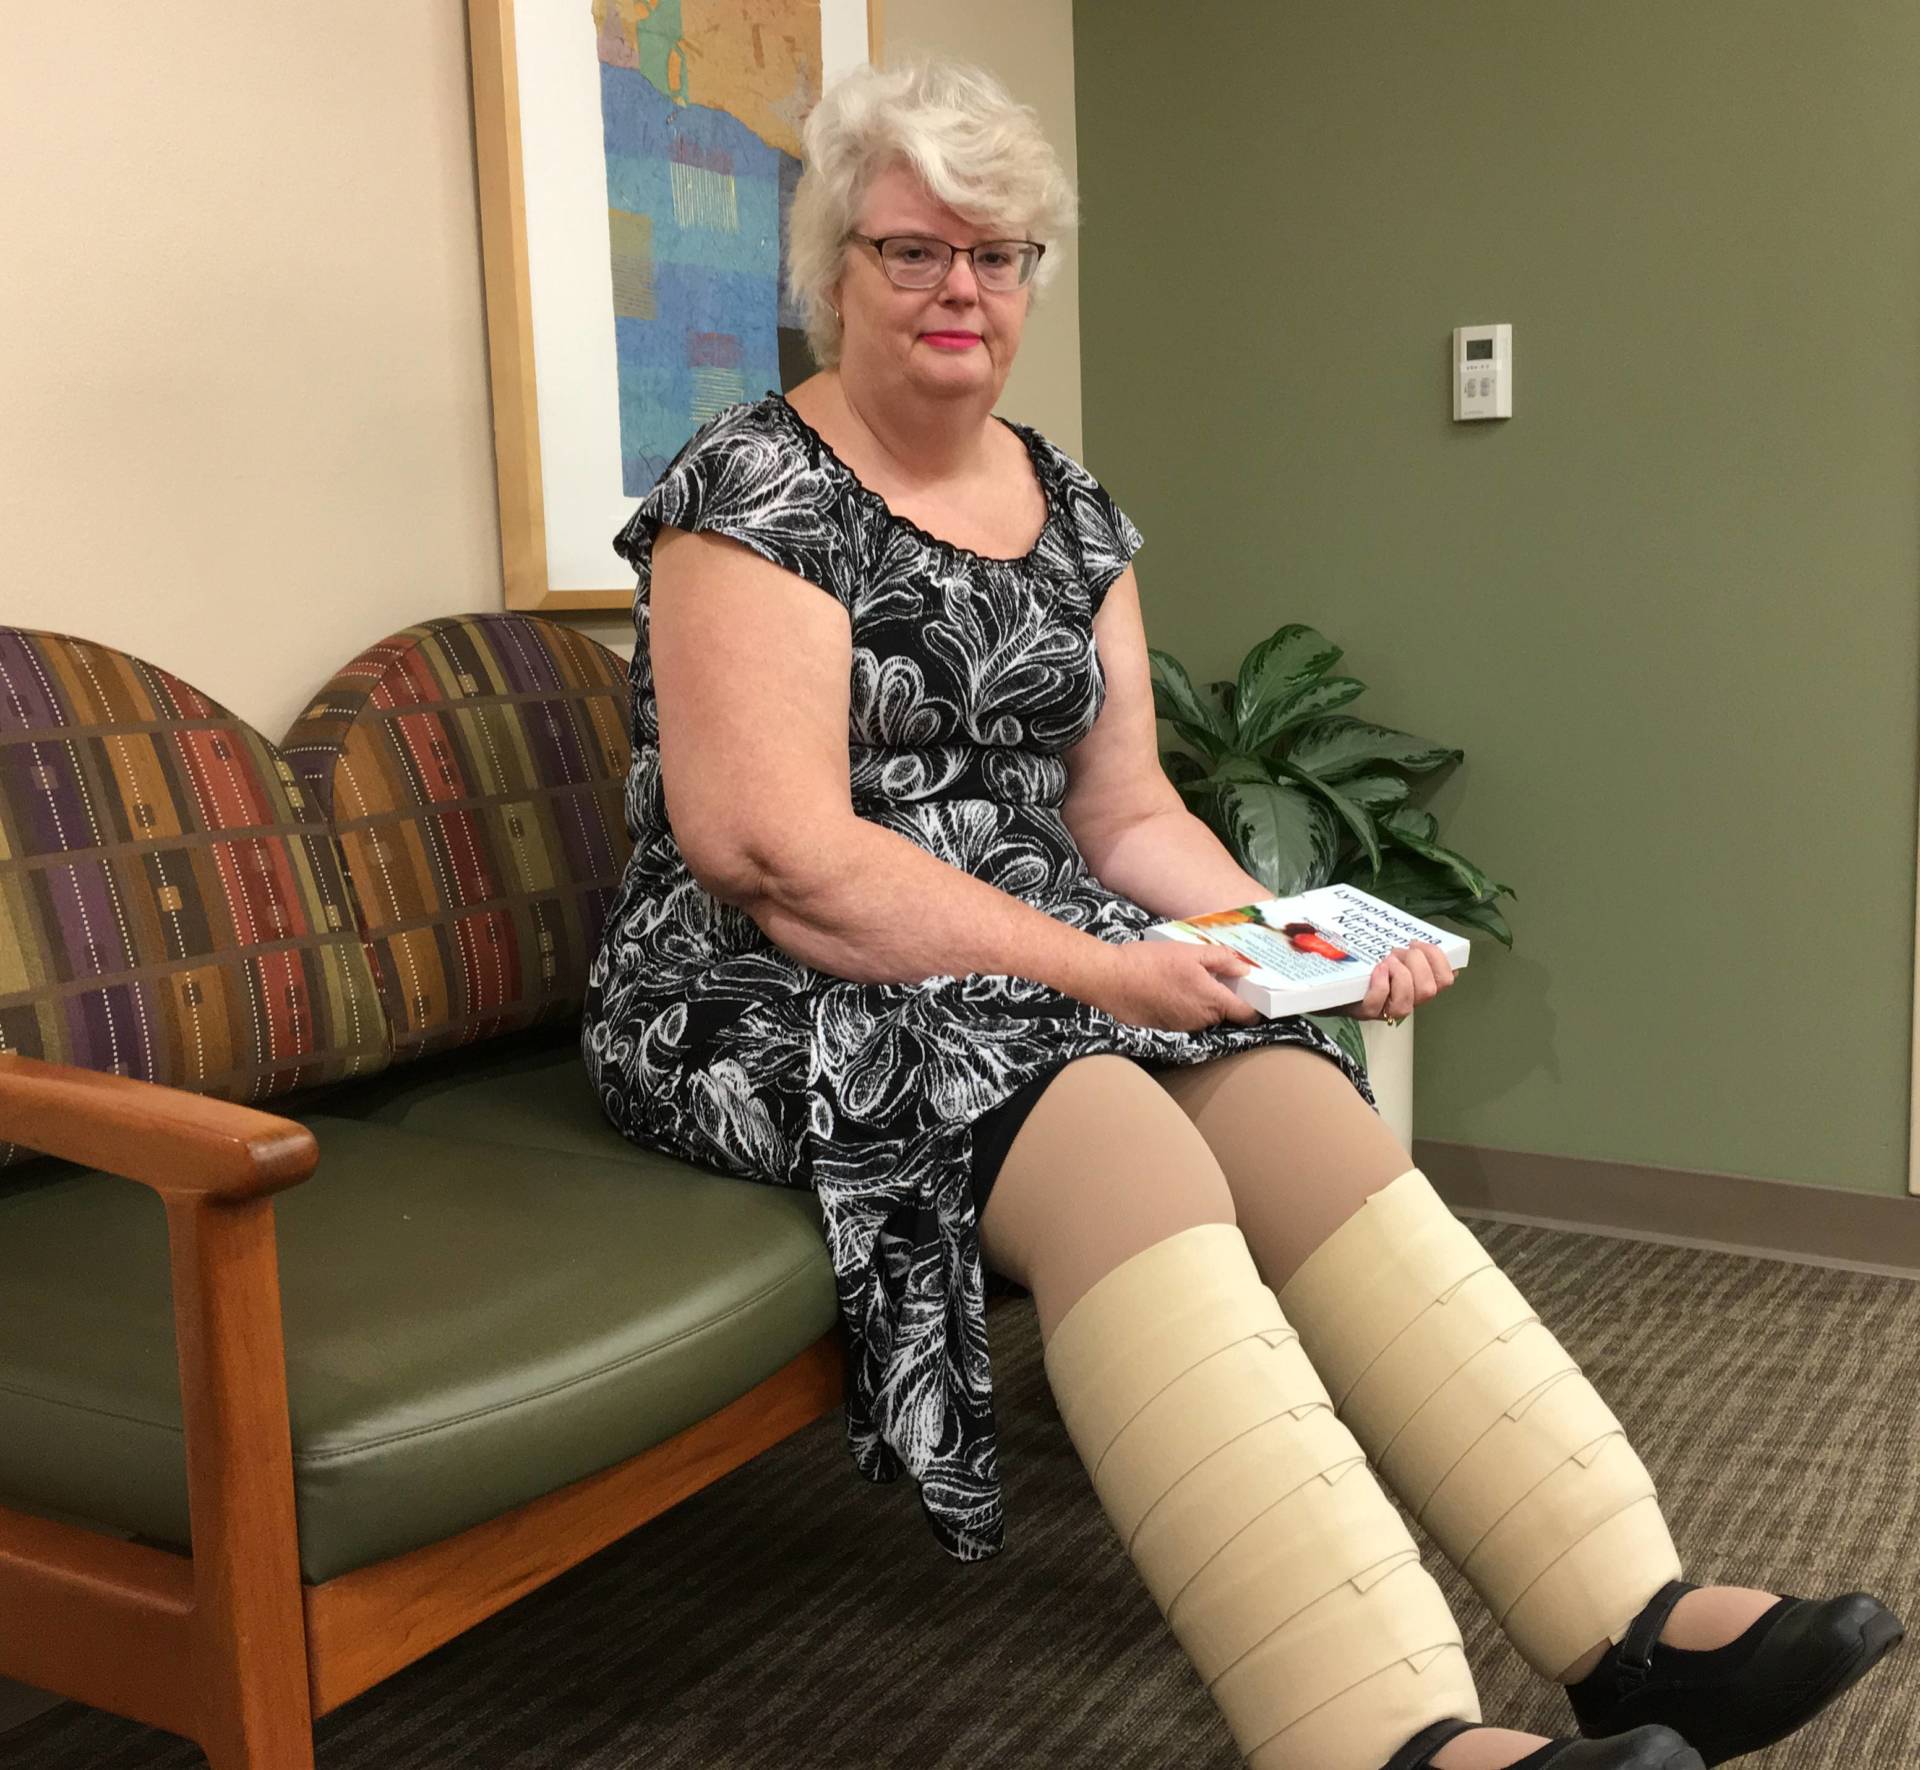 Lipedema: The Fat Disorder That Millions Have But No One Has Heard